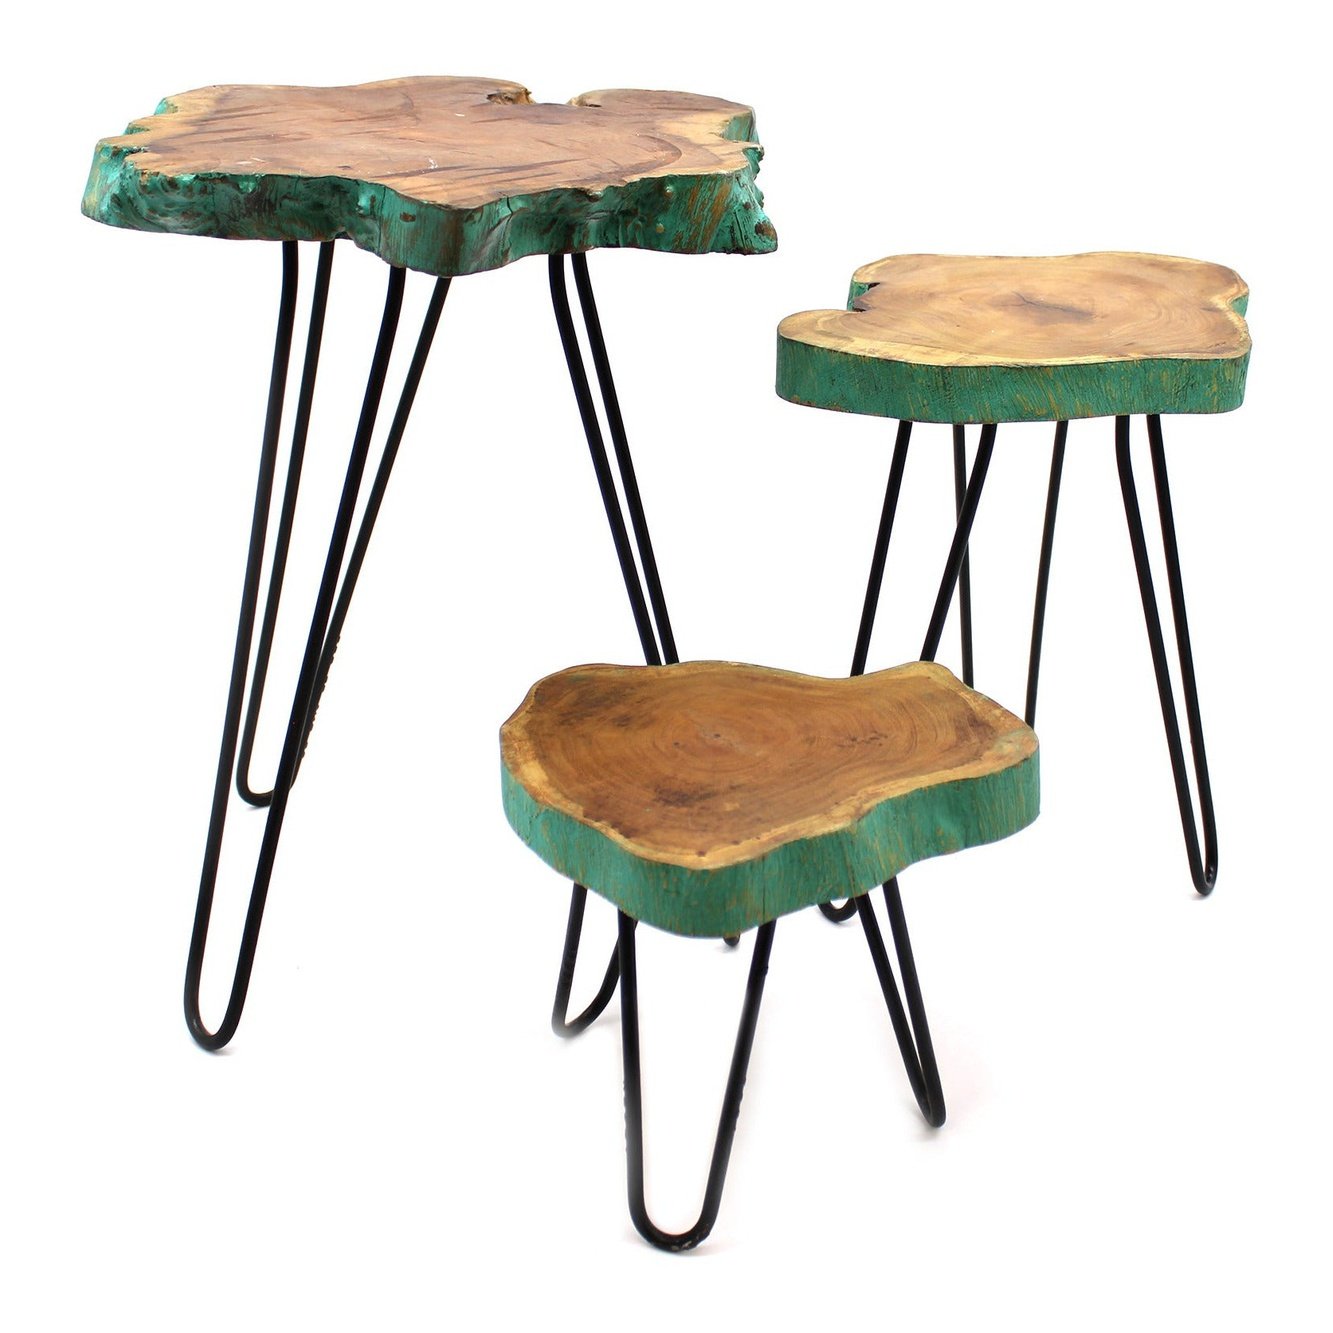 Set of 3 Wood Plant Stands - hightectrading.com